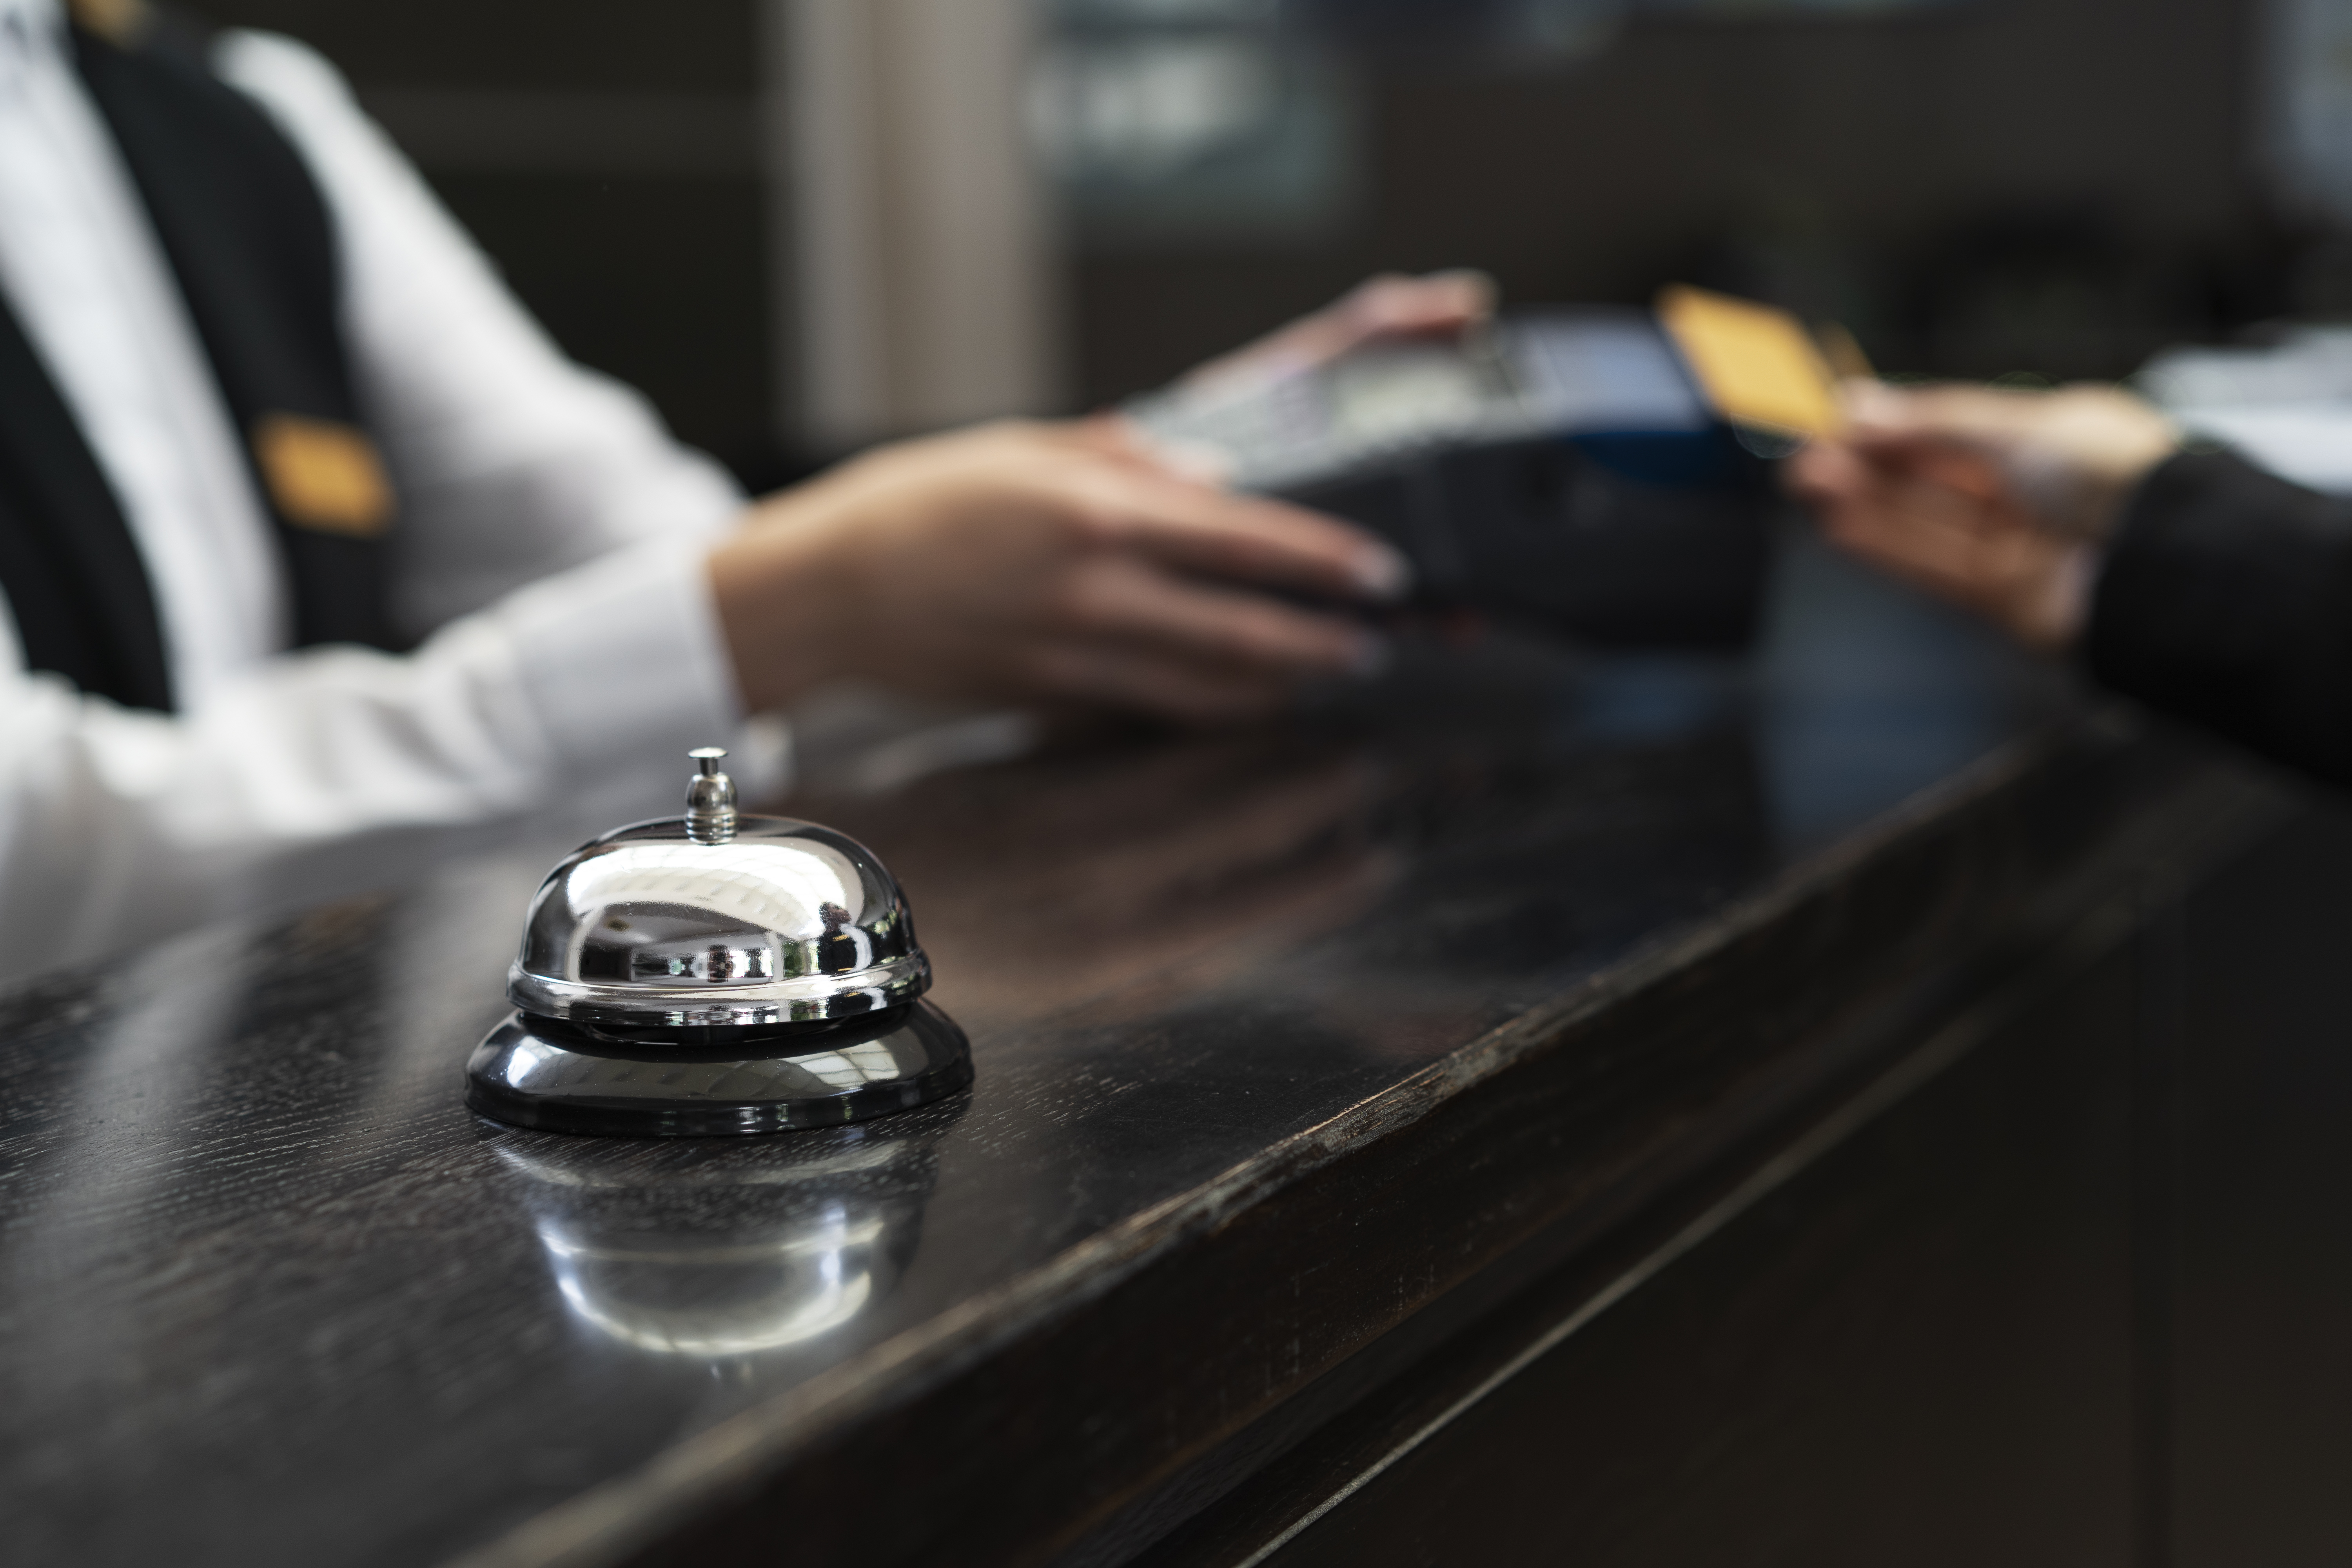 Point of Sale Software for Small Hotels: Top Features to Look For